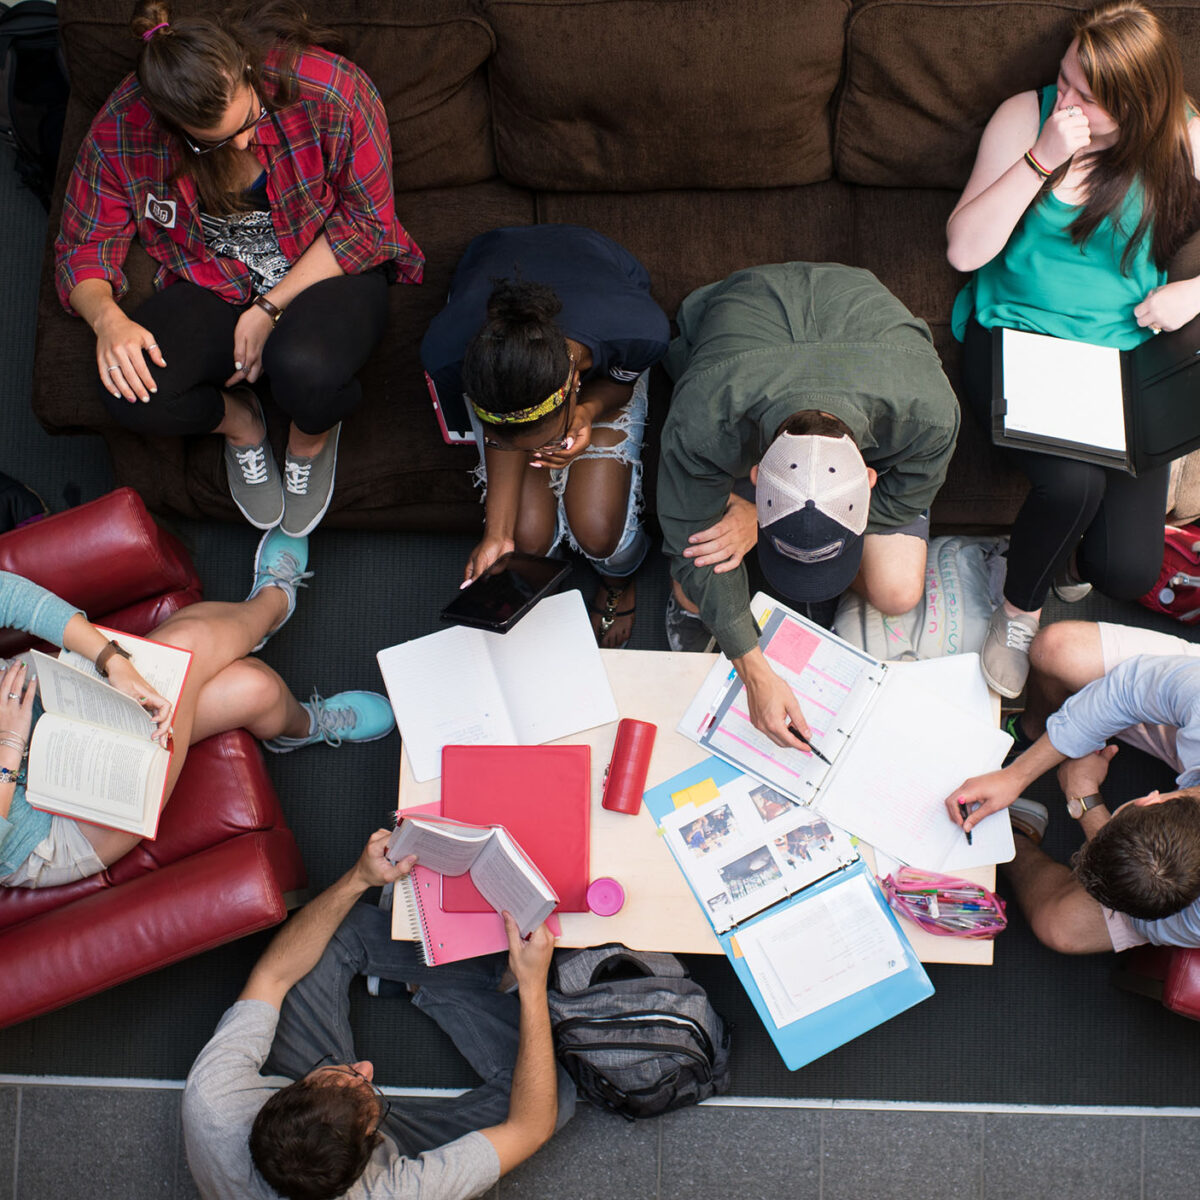 a group of students sitting on couches for a collaborative study session